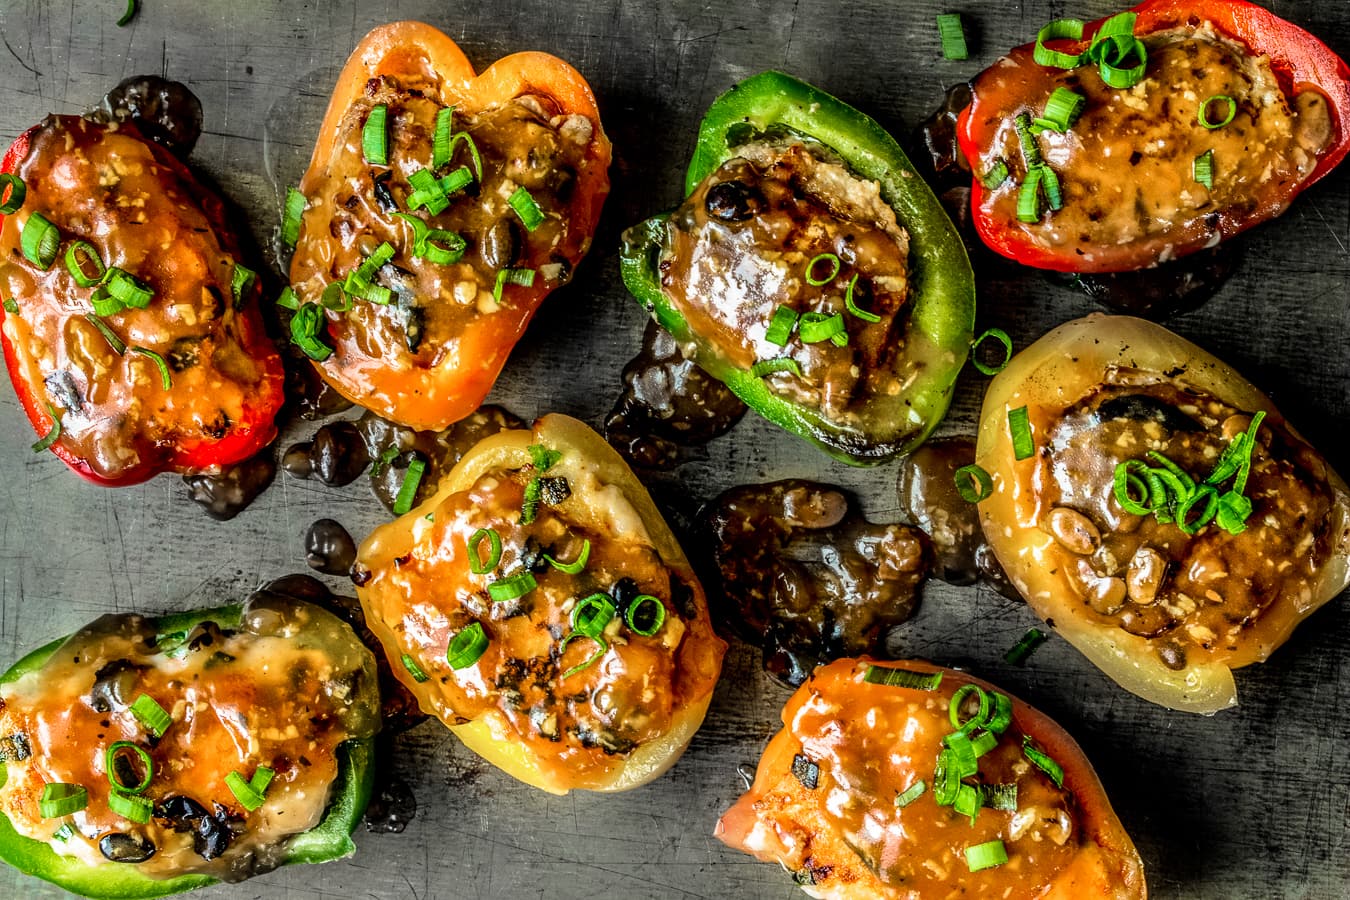 Chinese stuffed peppers (stuffed with shrimp) with black bean sauce on top.